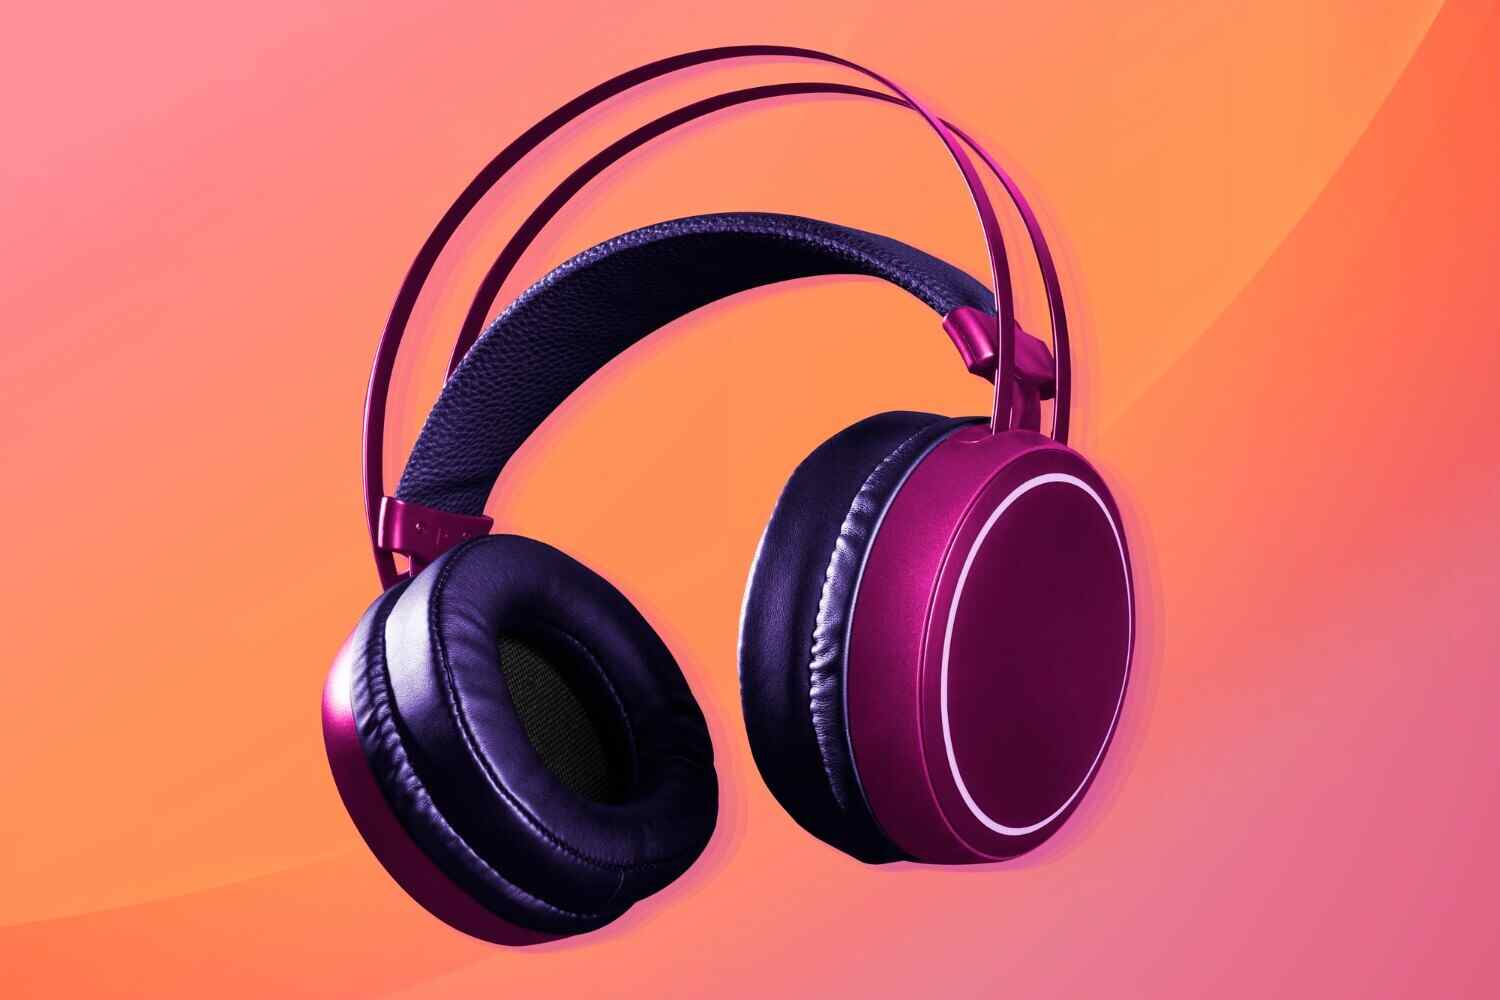 most expensive headset for gaming